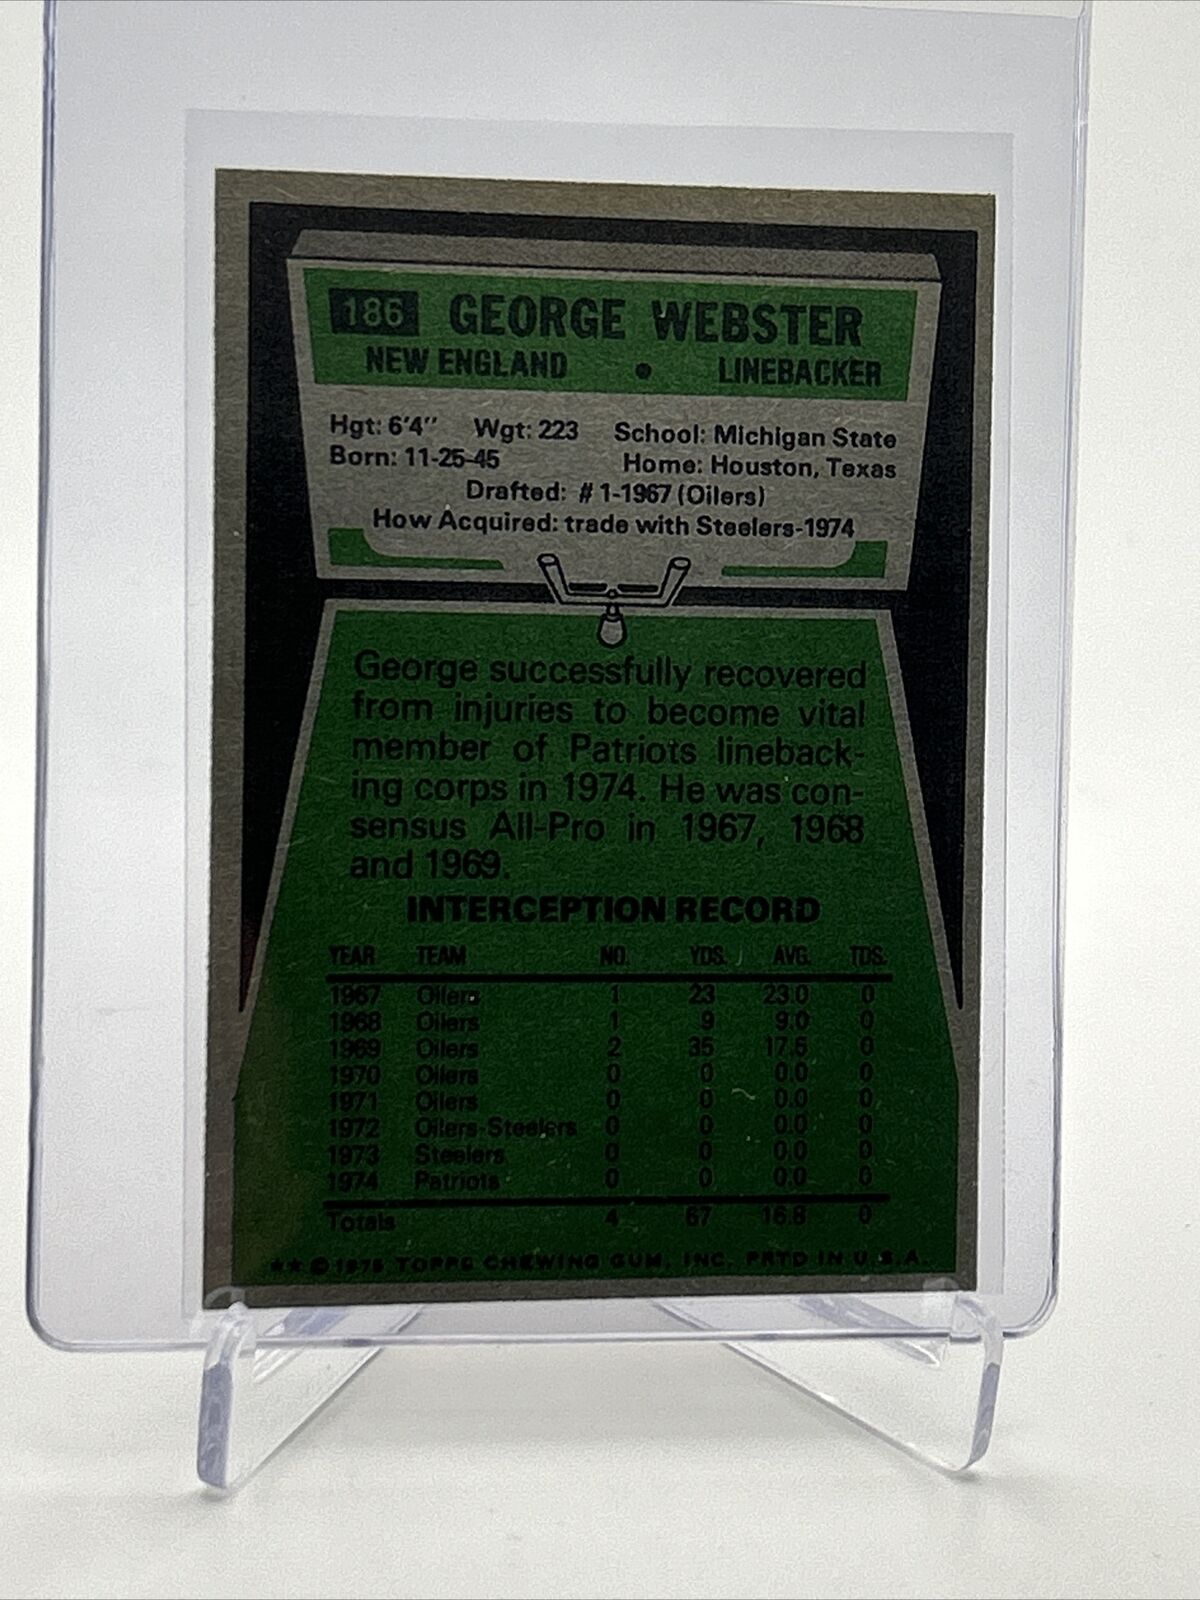 1975 Topps George Webster Football Card #186 EX-MT Quality FREE SHIPPING